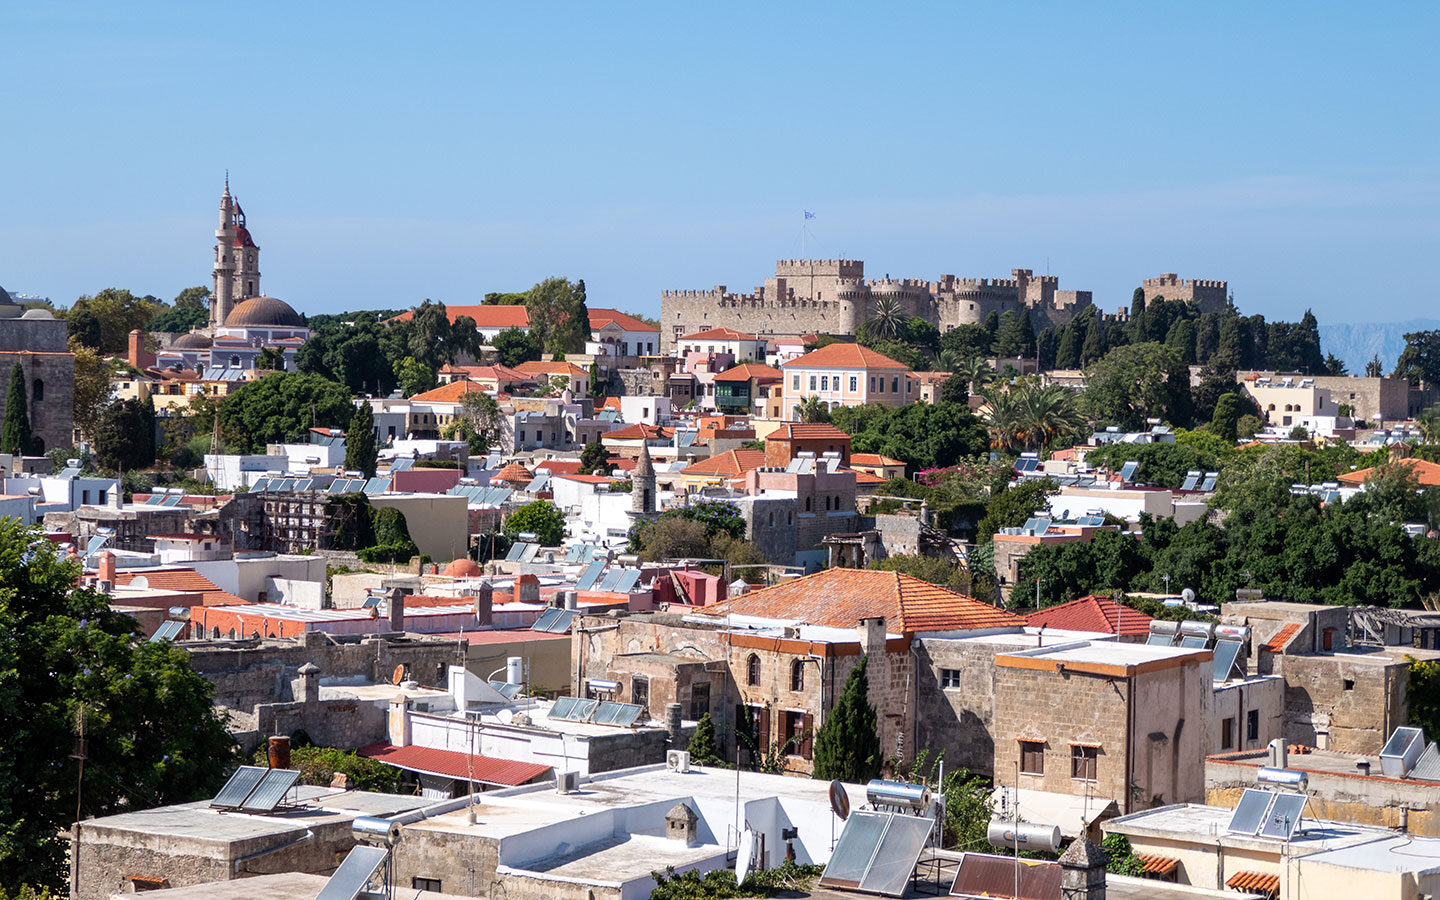 Views of the Palace of the Grand Master from the Minos Roof Garden Café terrace in Rhodes Town